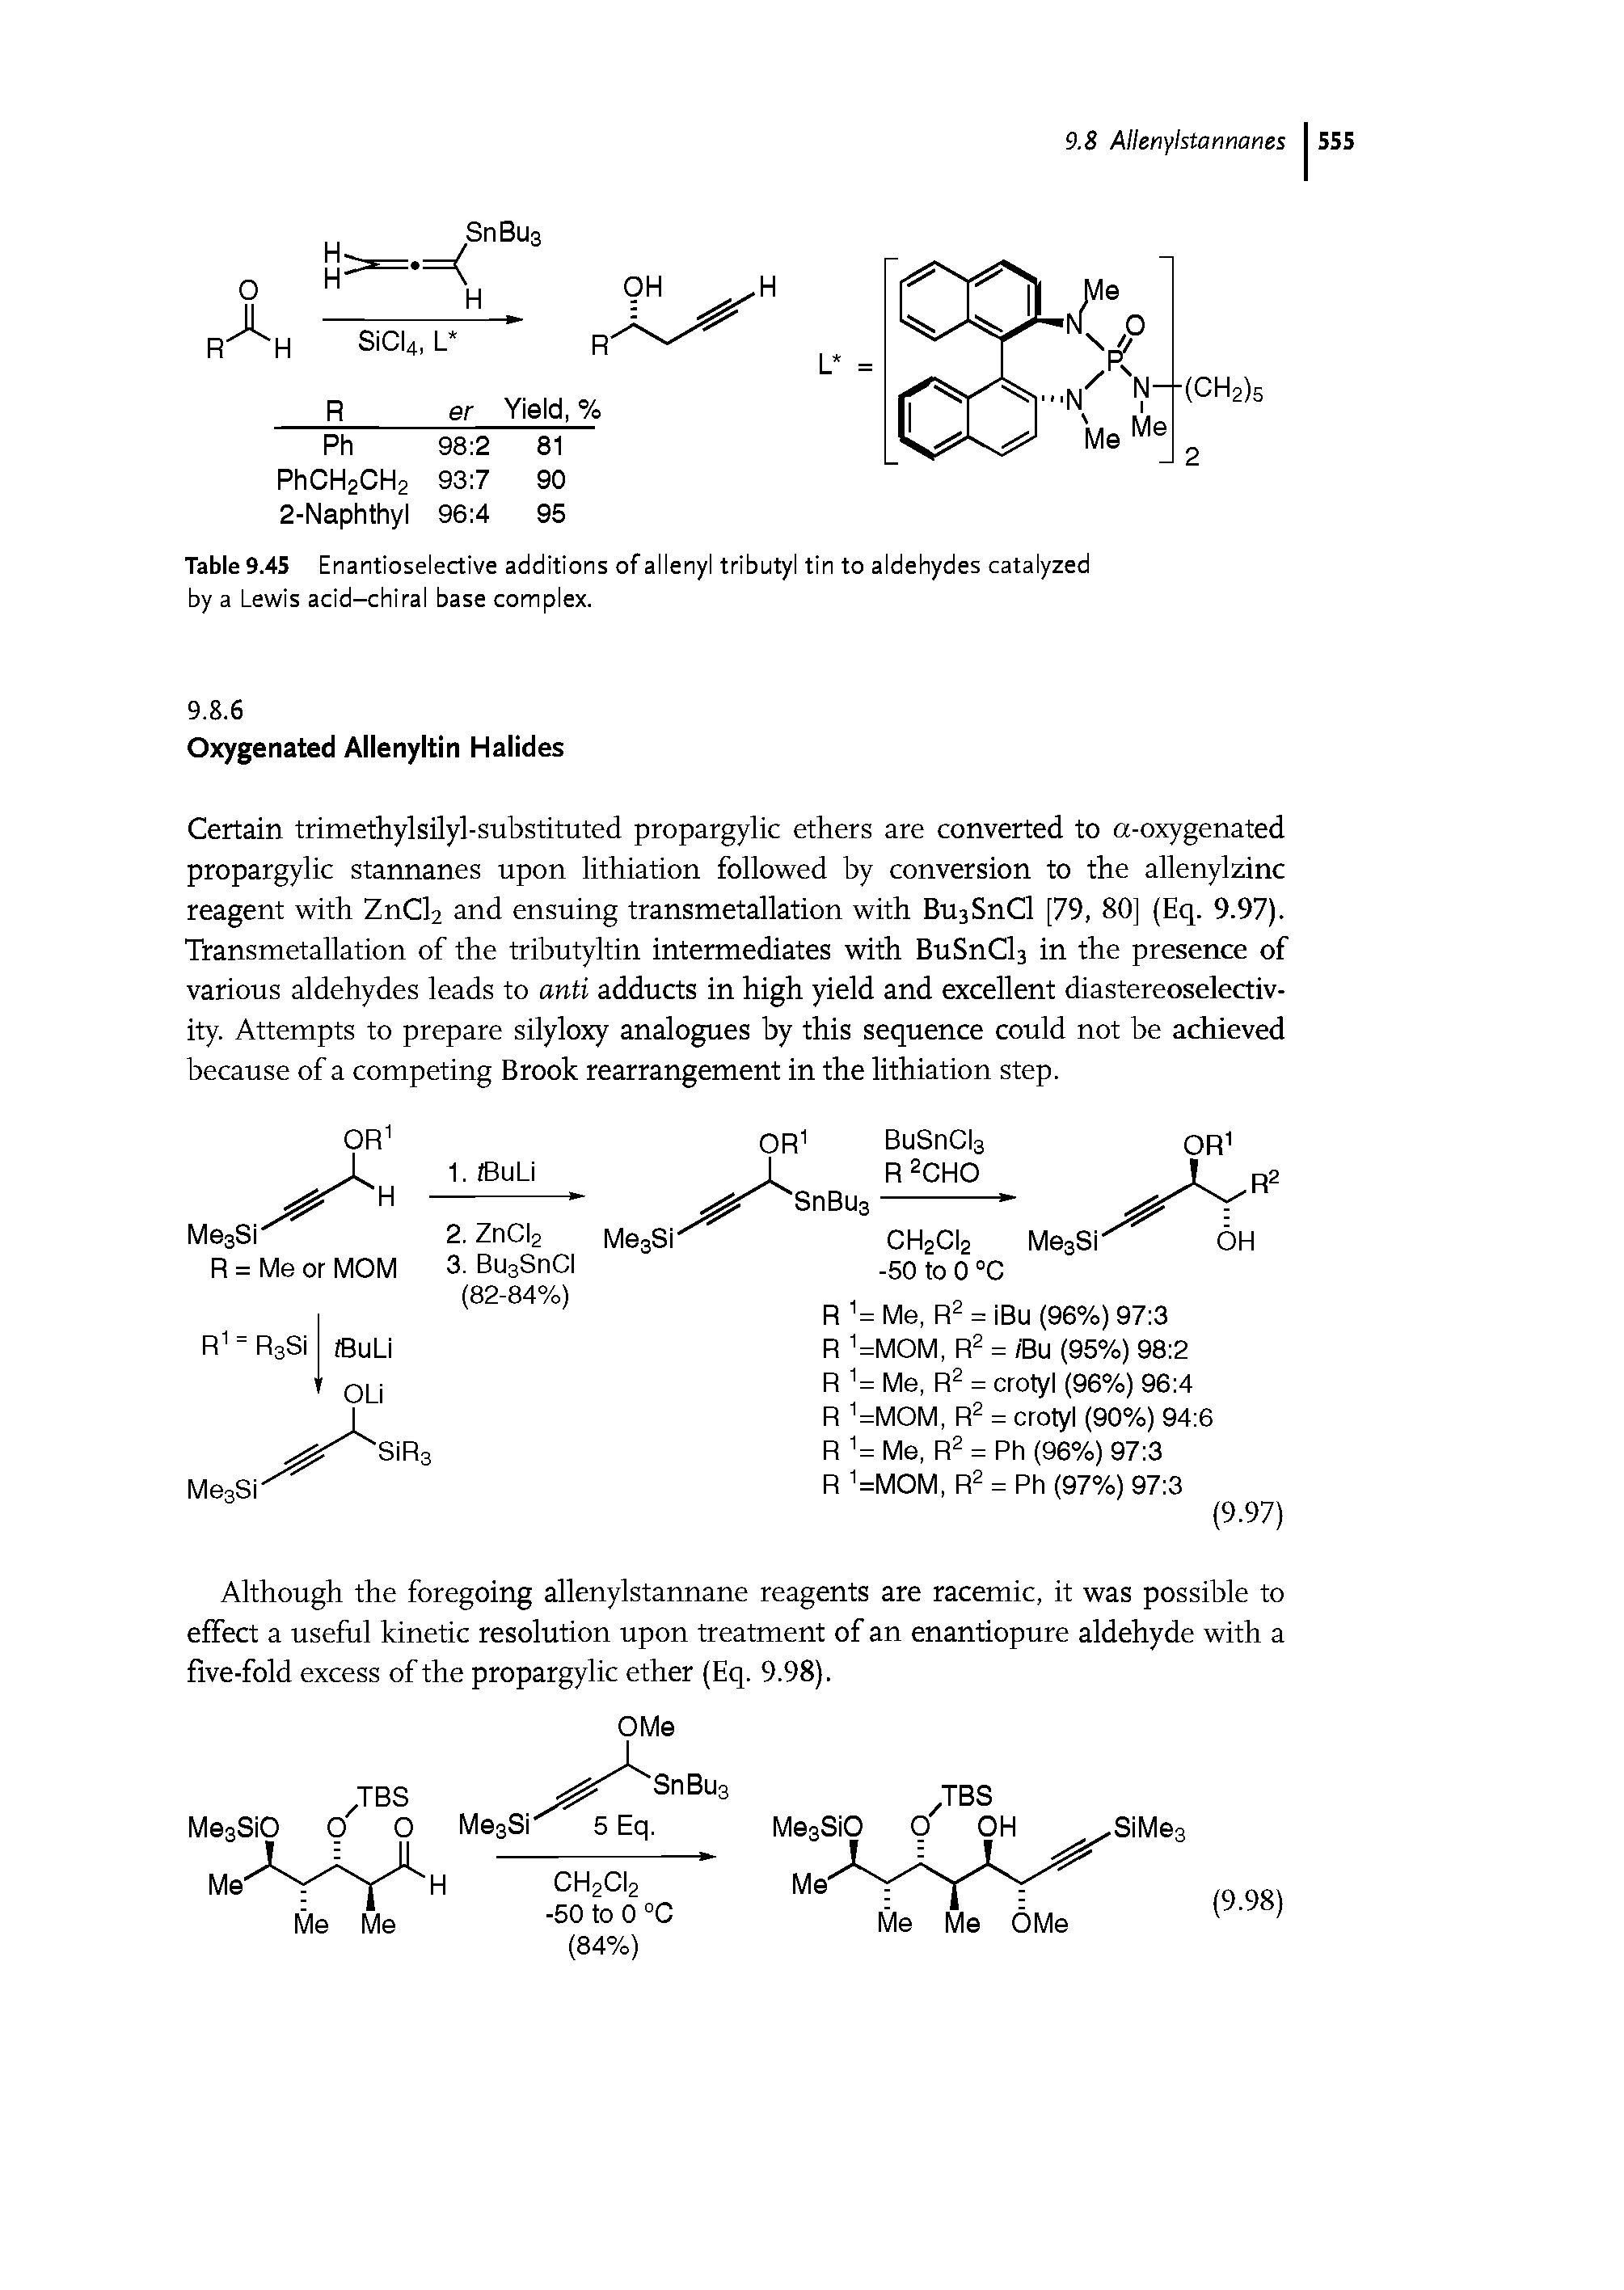 Table 9.4S Enantioselective additions of allenyl tributyl tin to aldehydes catalyzed by a Lewis acid-chiral base complex.